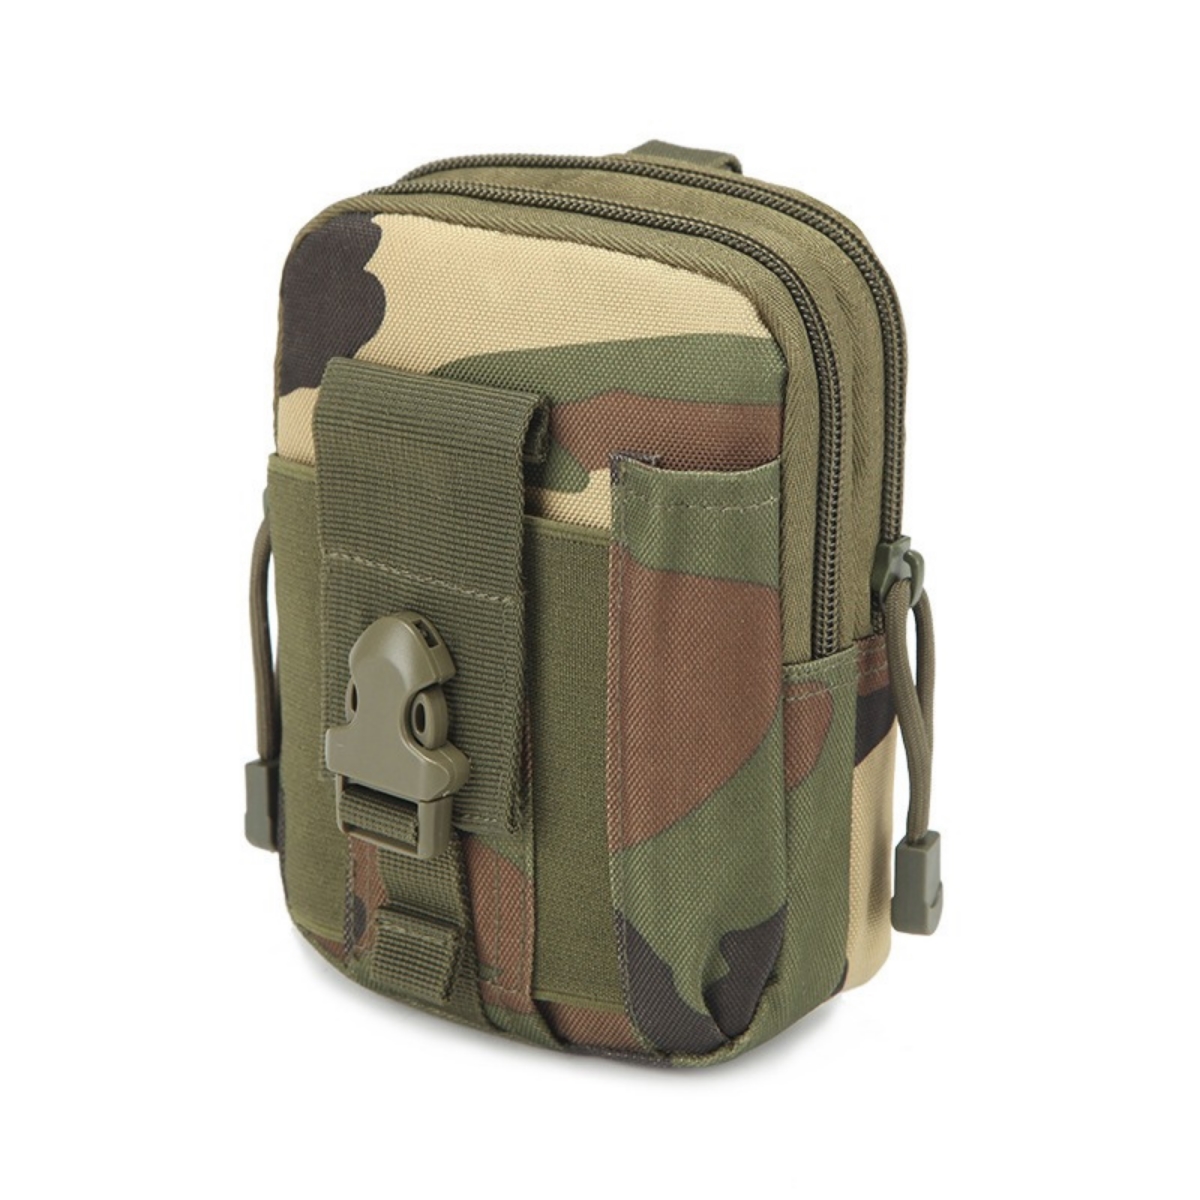 Picture of JupiterGear JG-SLNGBAG2-CAMO Tactical MOLLE Military Pouch Waist Bag for Hiking and Outdoor Activities (JG-SLNGBAG2-CAMO) Camo